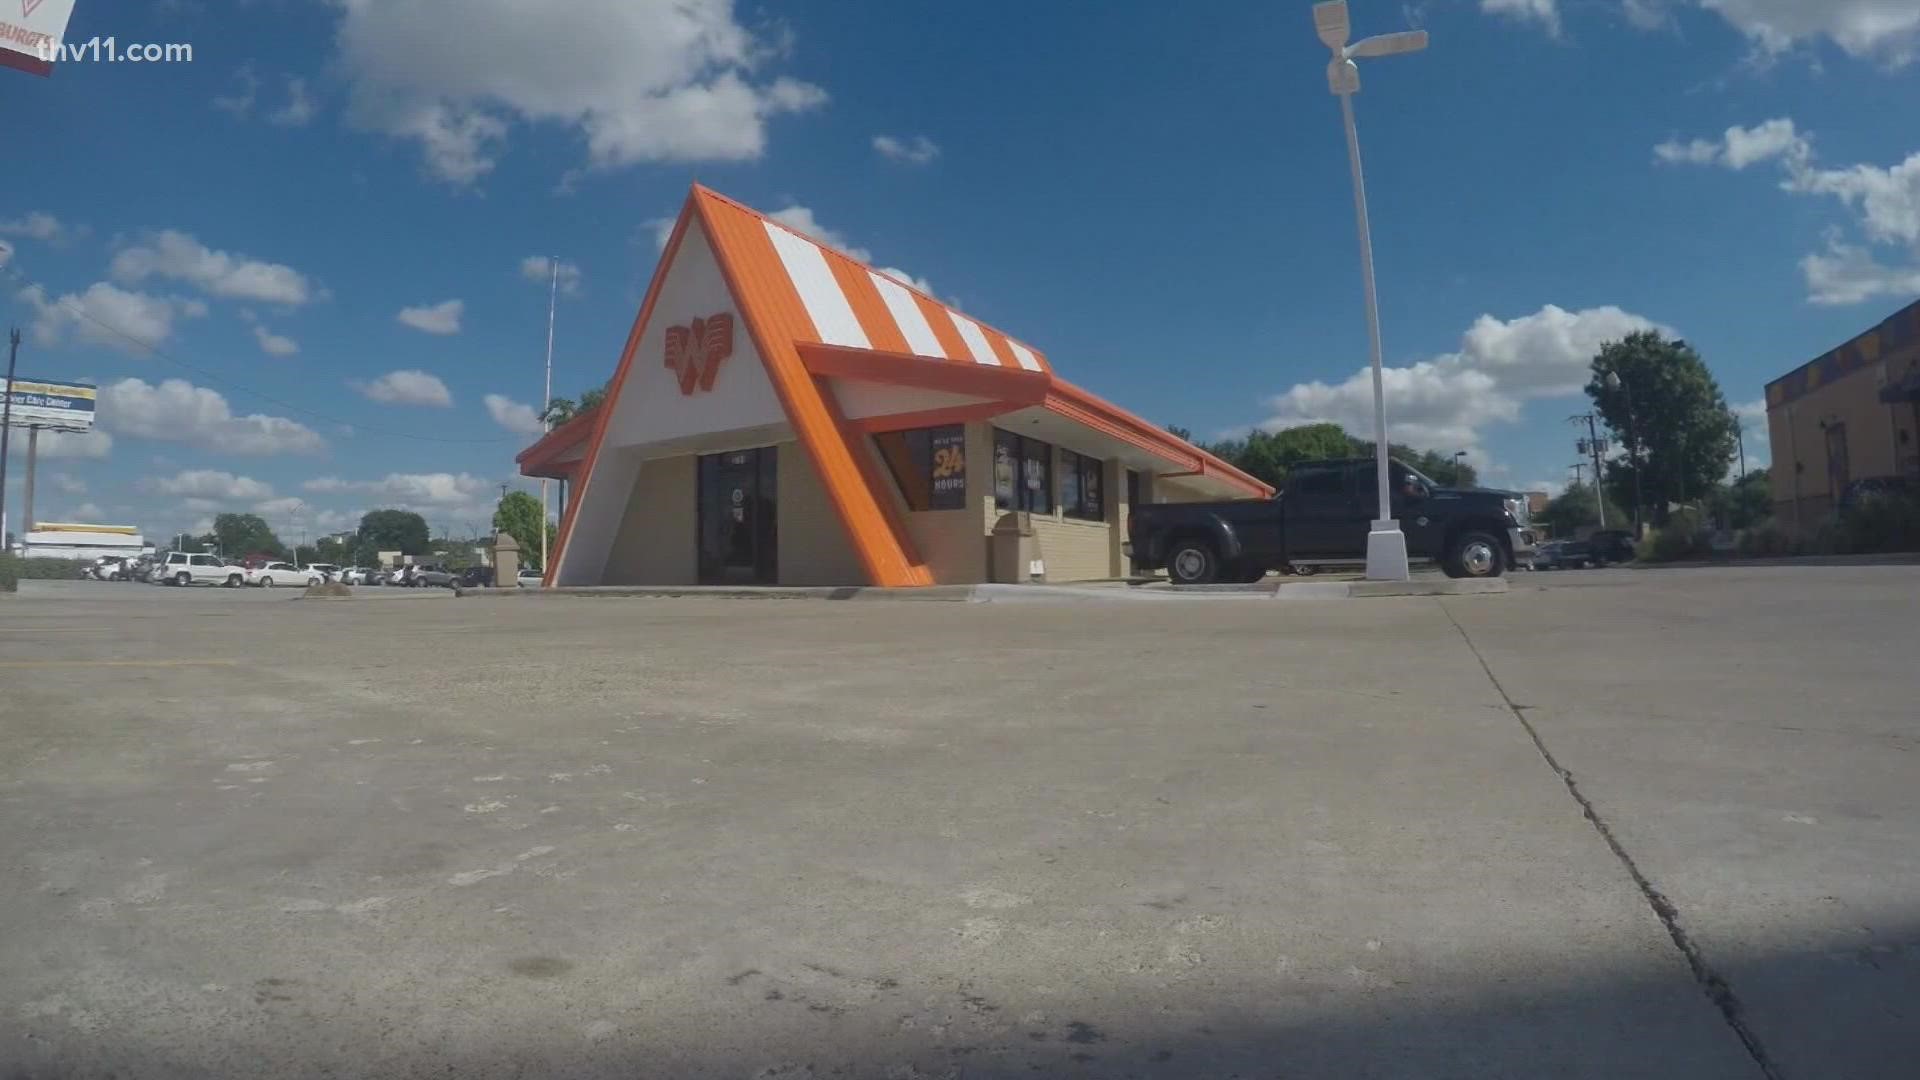 Lance Turner provides the top business stories for September 22, 2022 including a new Whataburger coming to Little Rock.